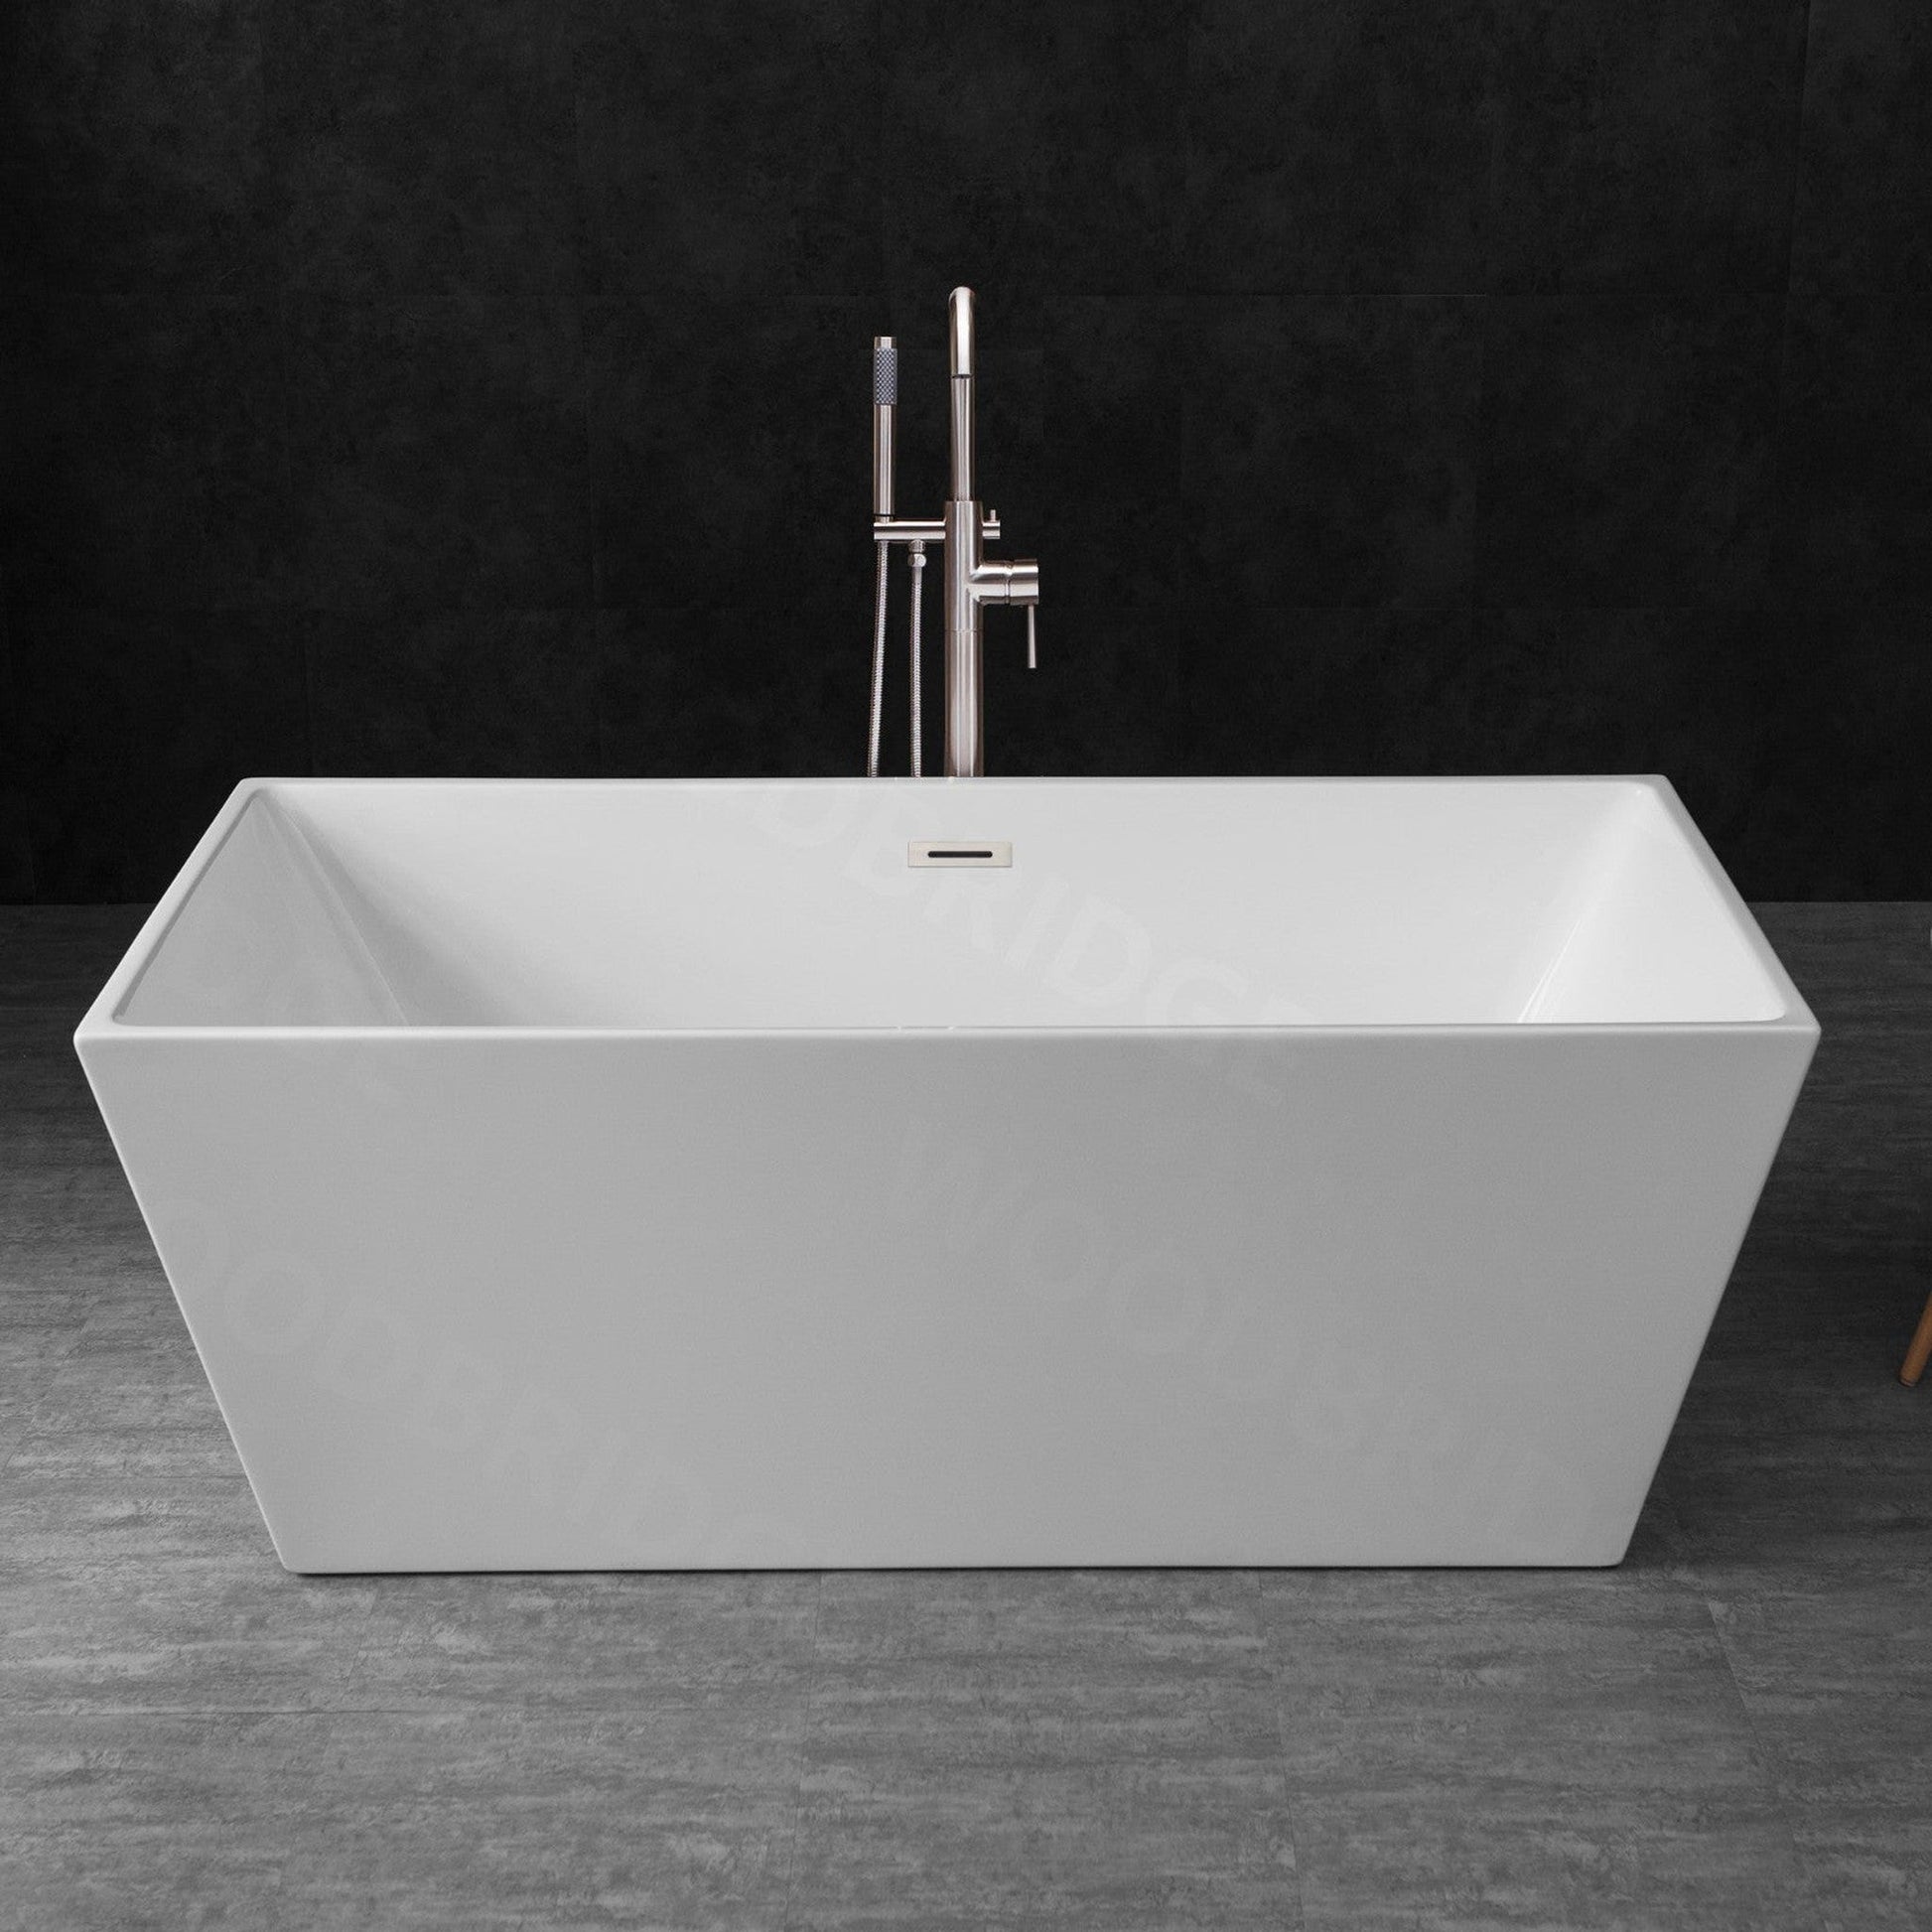 WoodBridge B1412 59" White Acrylic Freestanding Soaking Bathtub With Brushed Nickel Drain, Overflow, F0070BNVT Tub Filler and Caddy Tray